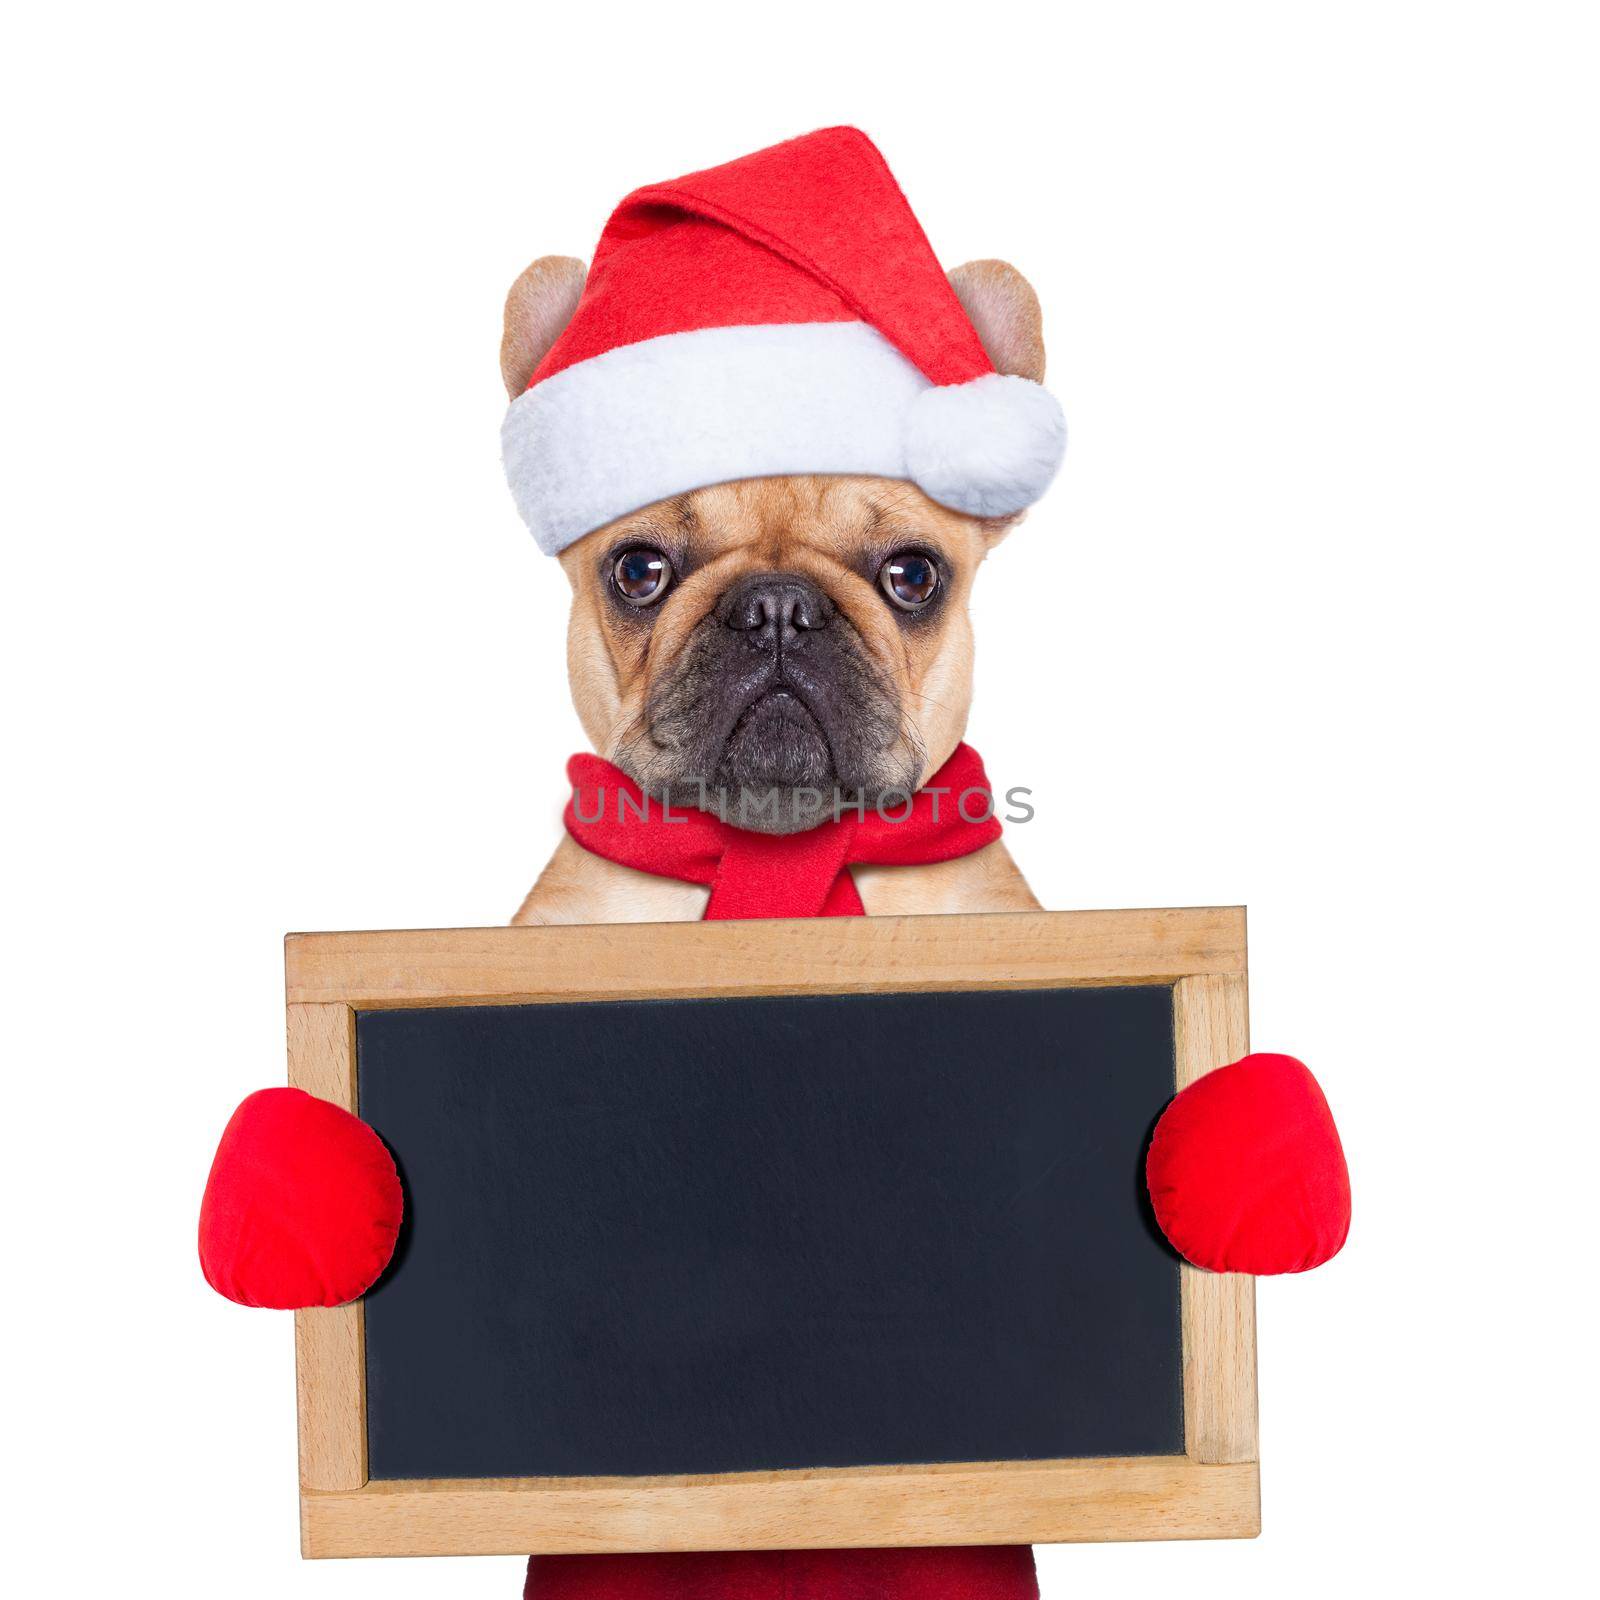 Santa claus christmas dog wearing a hat holding a blackboard or placard , isolated on white background